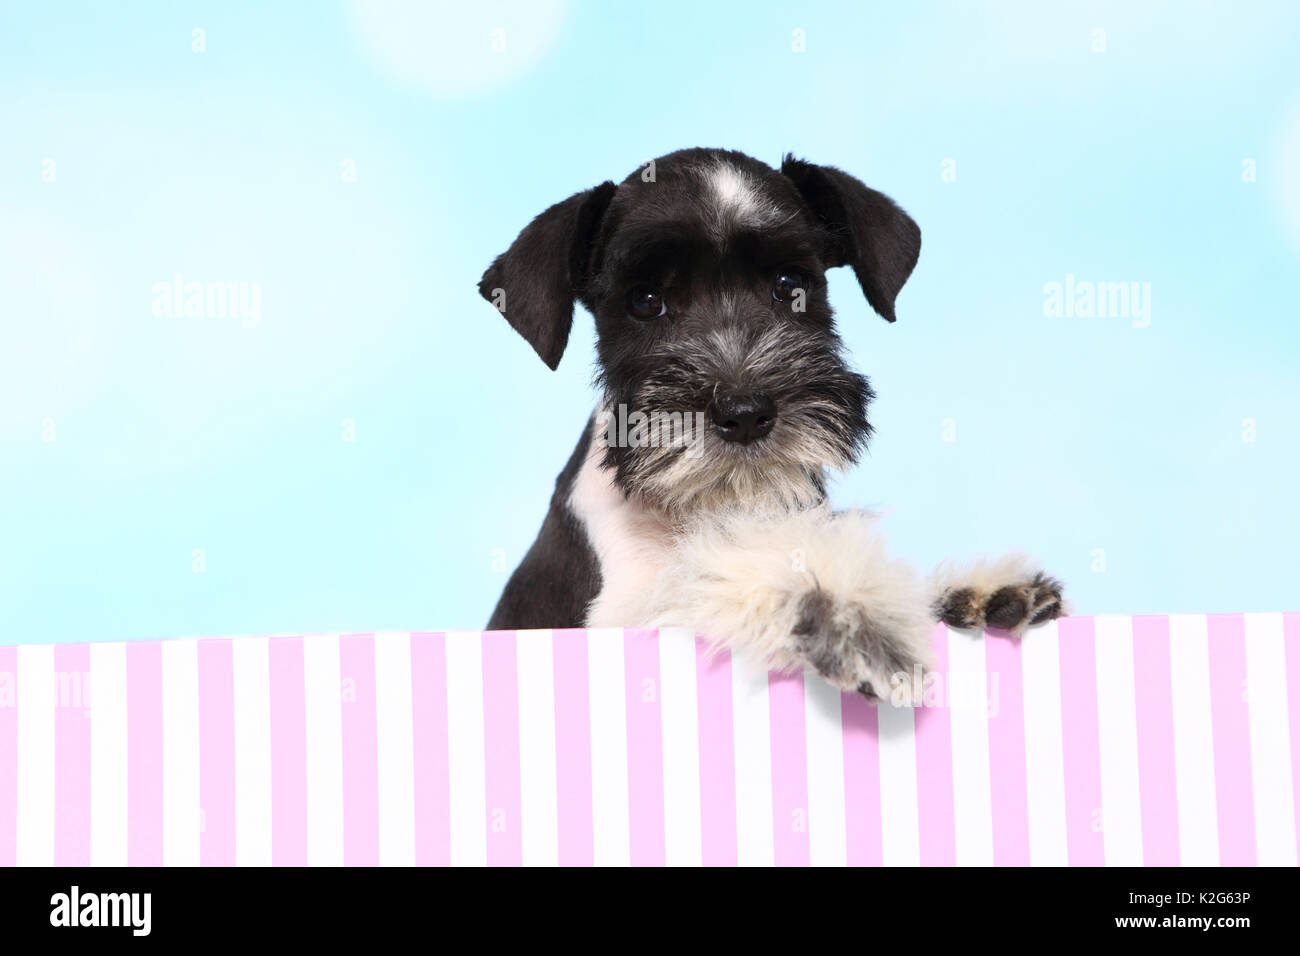 Parti-colored Miniature Schnauzer. Puppy in a striped box, seen against a light blue background. Germany Stock Photo